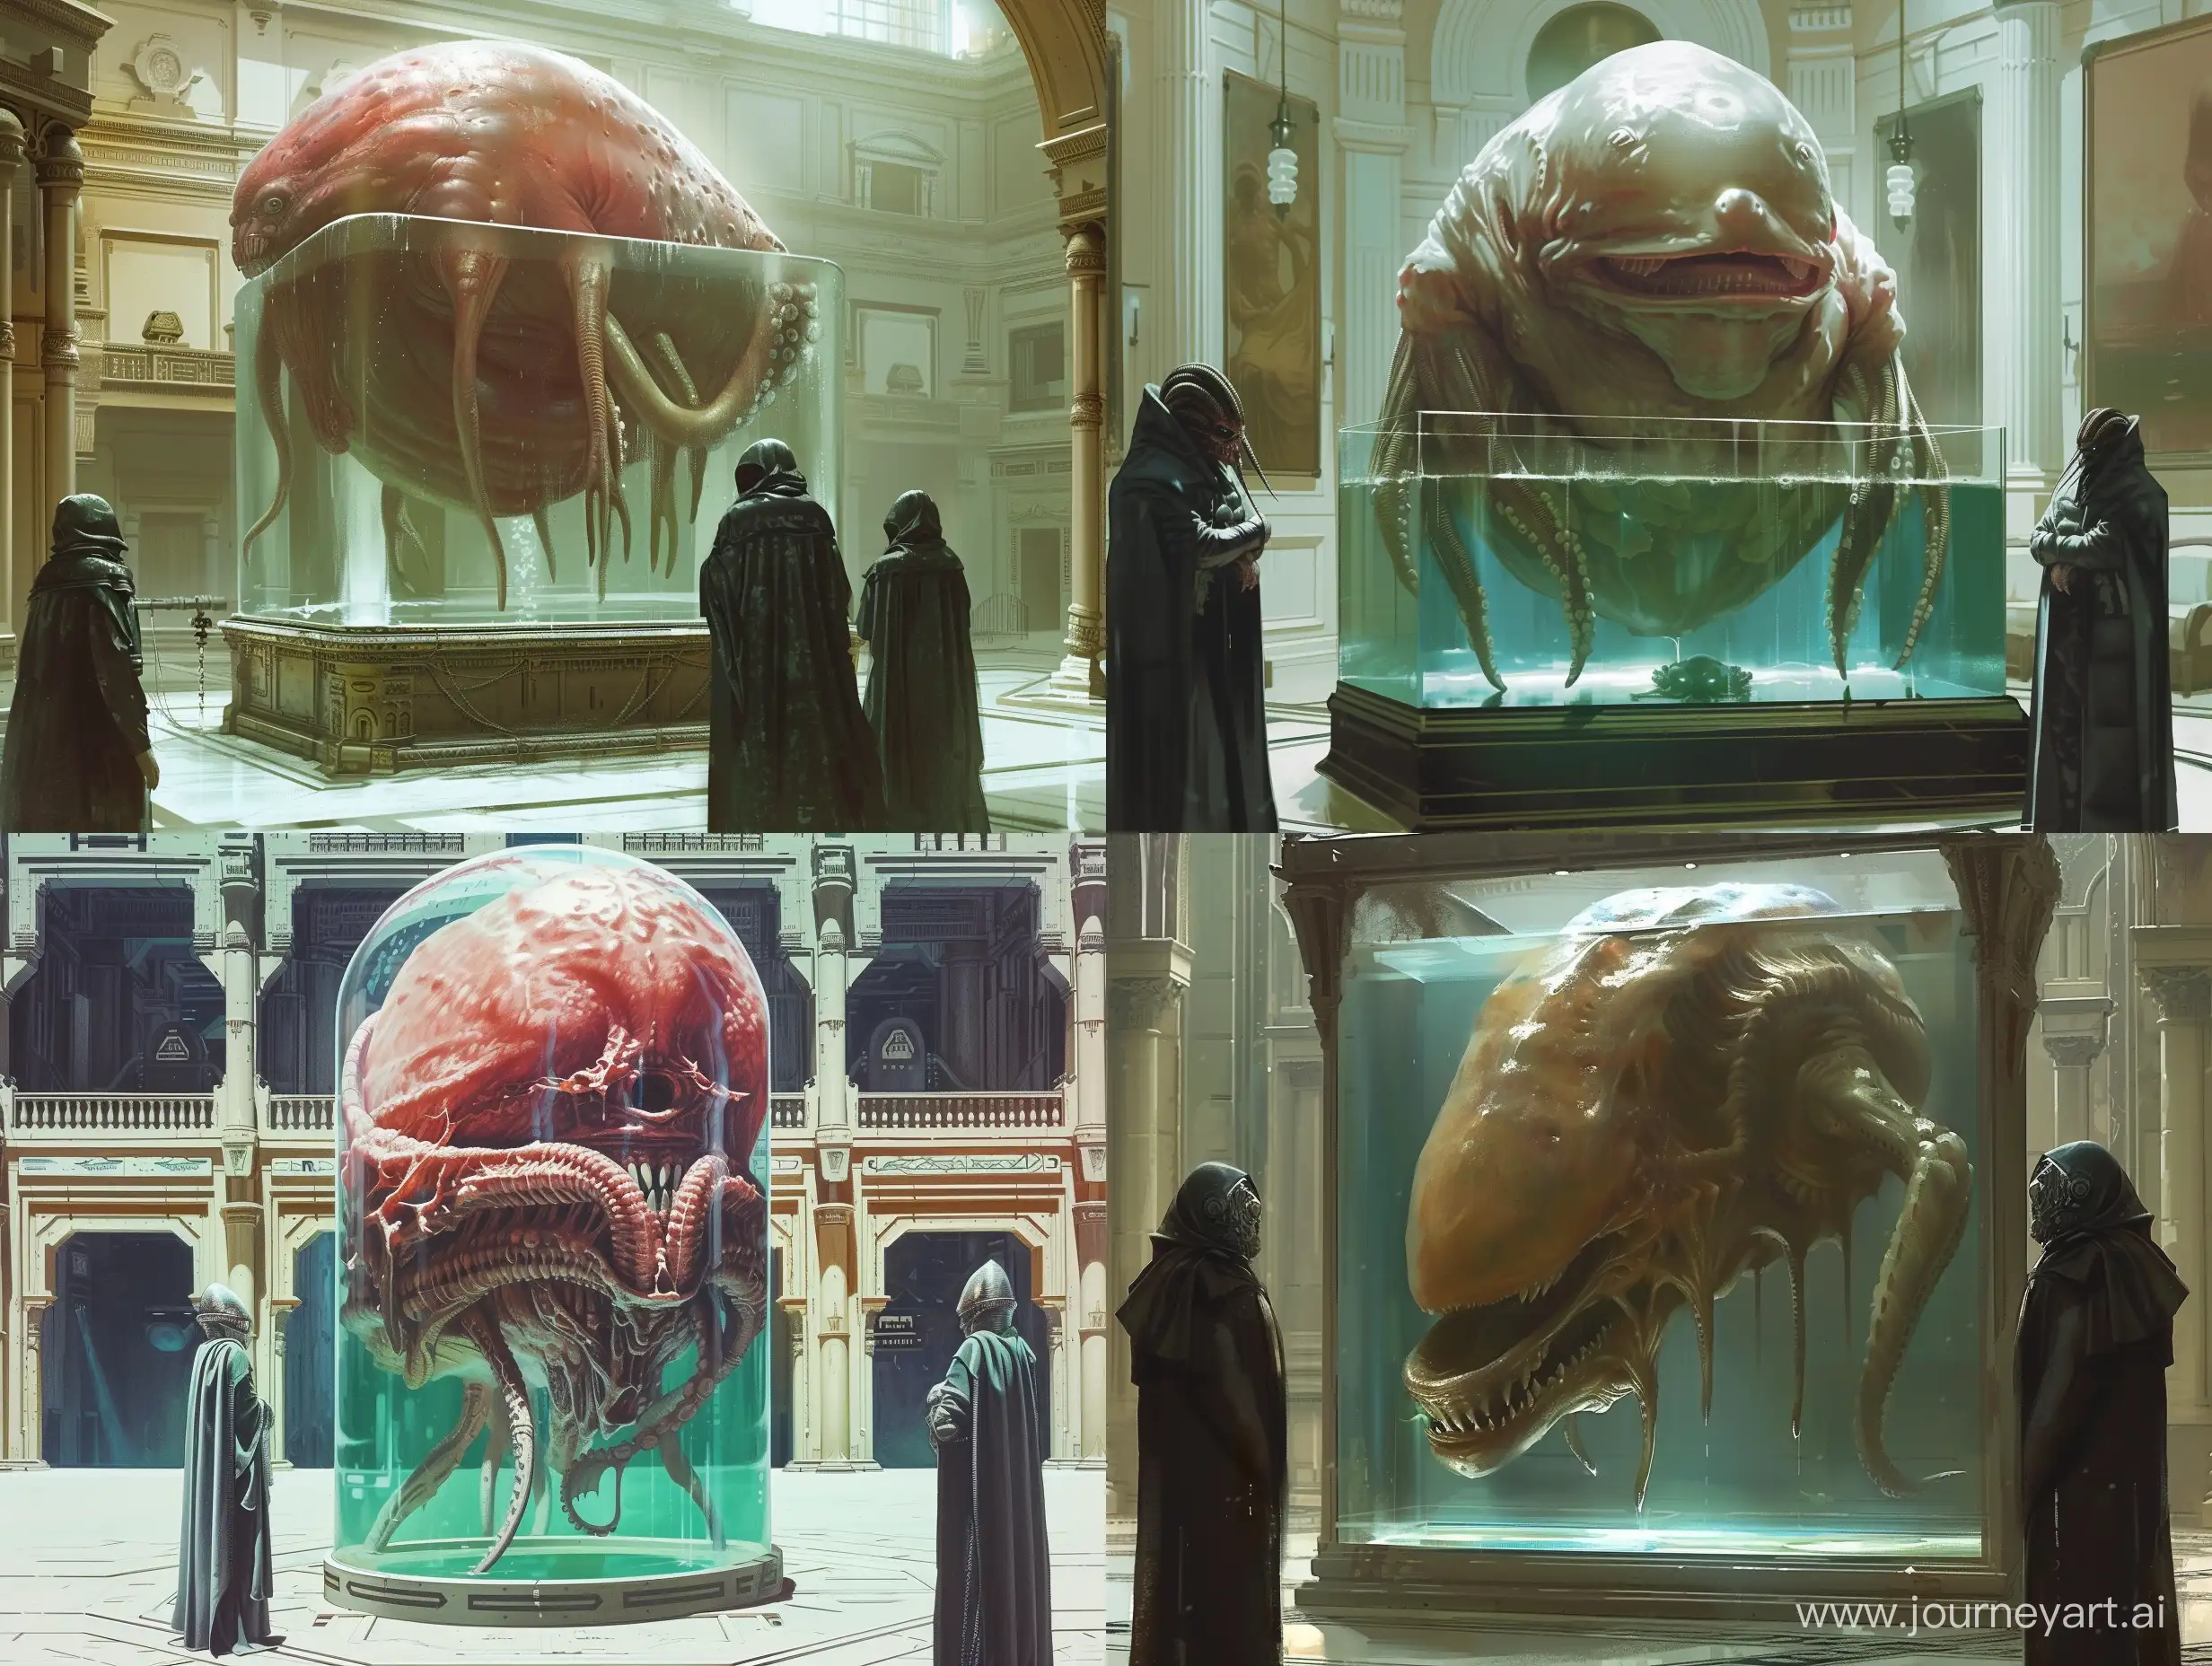 a large fleshy aquatic alien with tentacles floating in a tank of clear liquid painted by H.R. Giger. in sci-fi palace setting. flanked by two smaller cloaked humanoid guards. retro science fiction art style. in color.
